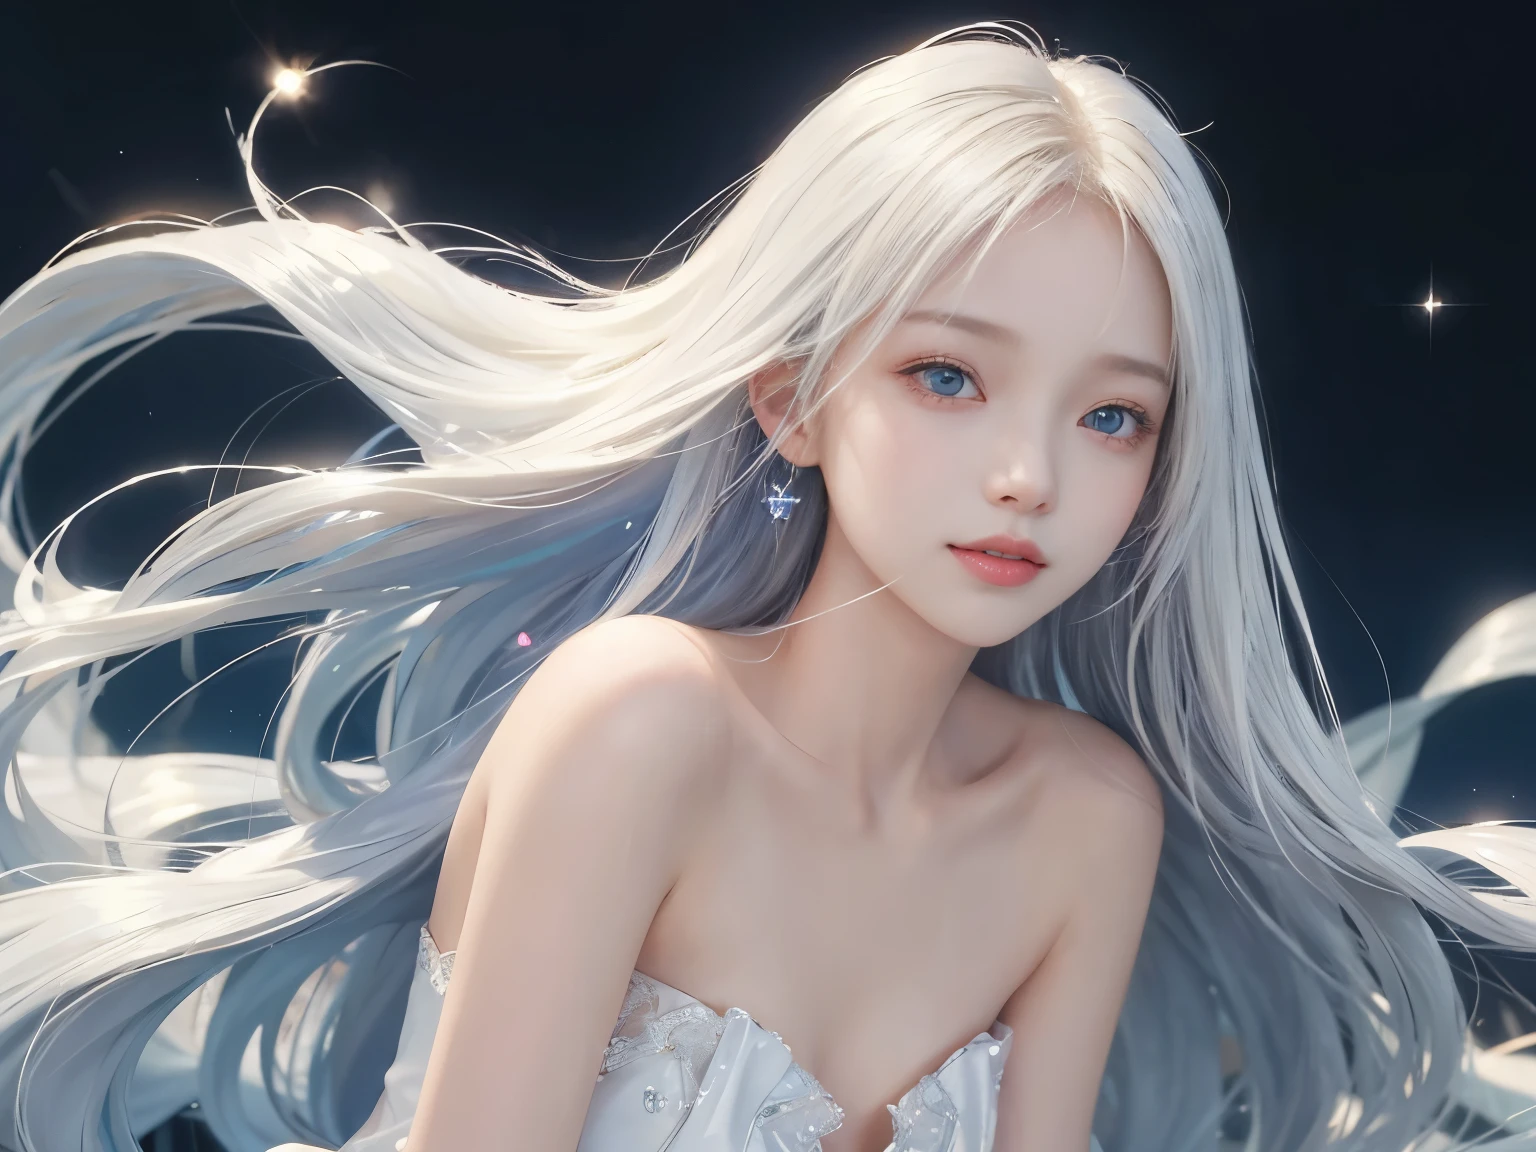 1 girl、portlate、blue-sky、Bright and very beautiful face、smil、young, shiny white shiny skin、Best look rondo hair with dazzling light reflections Beautiful platinum blonde super long silky straight hair gloss、Very beautiful 17 year old with long bangs、Beautiful, lovely, Beautiful girl with shining clear eyes、Smiled、Gentle、